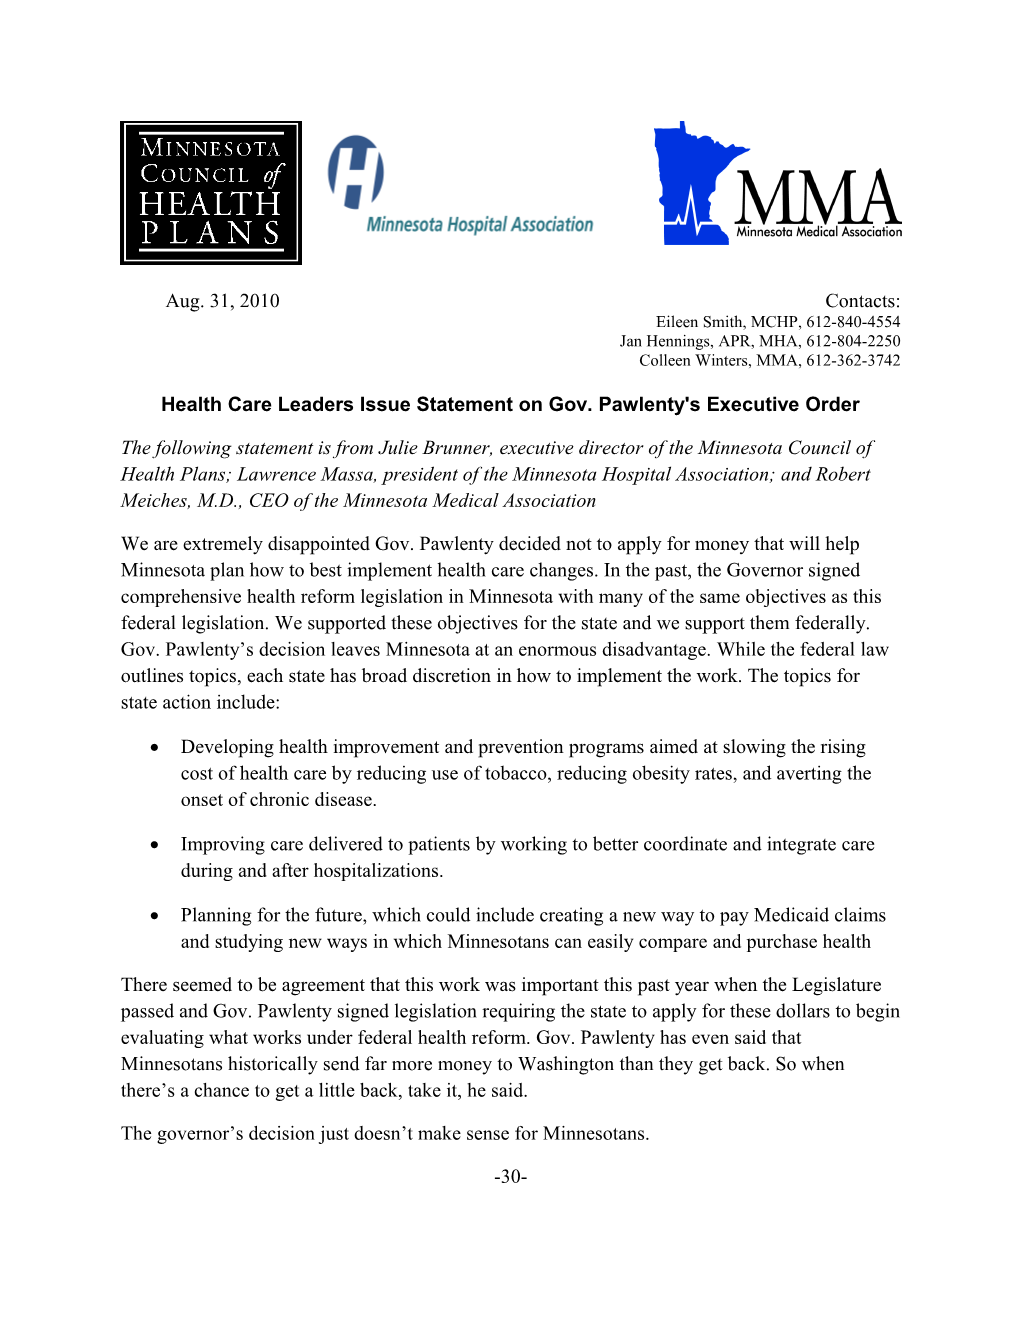 Health Care Leaders Issue Statement on Gov. Pawlenty's Executive Order